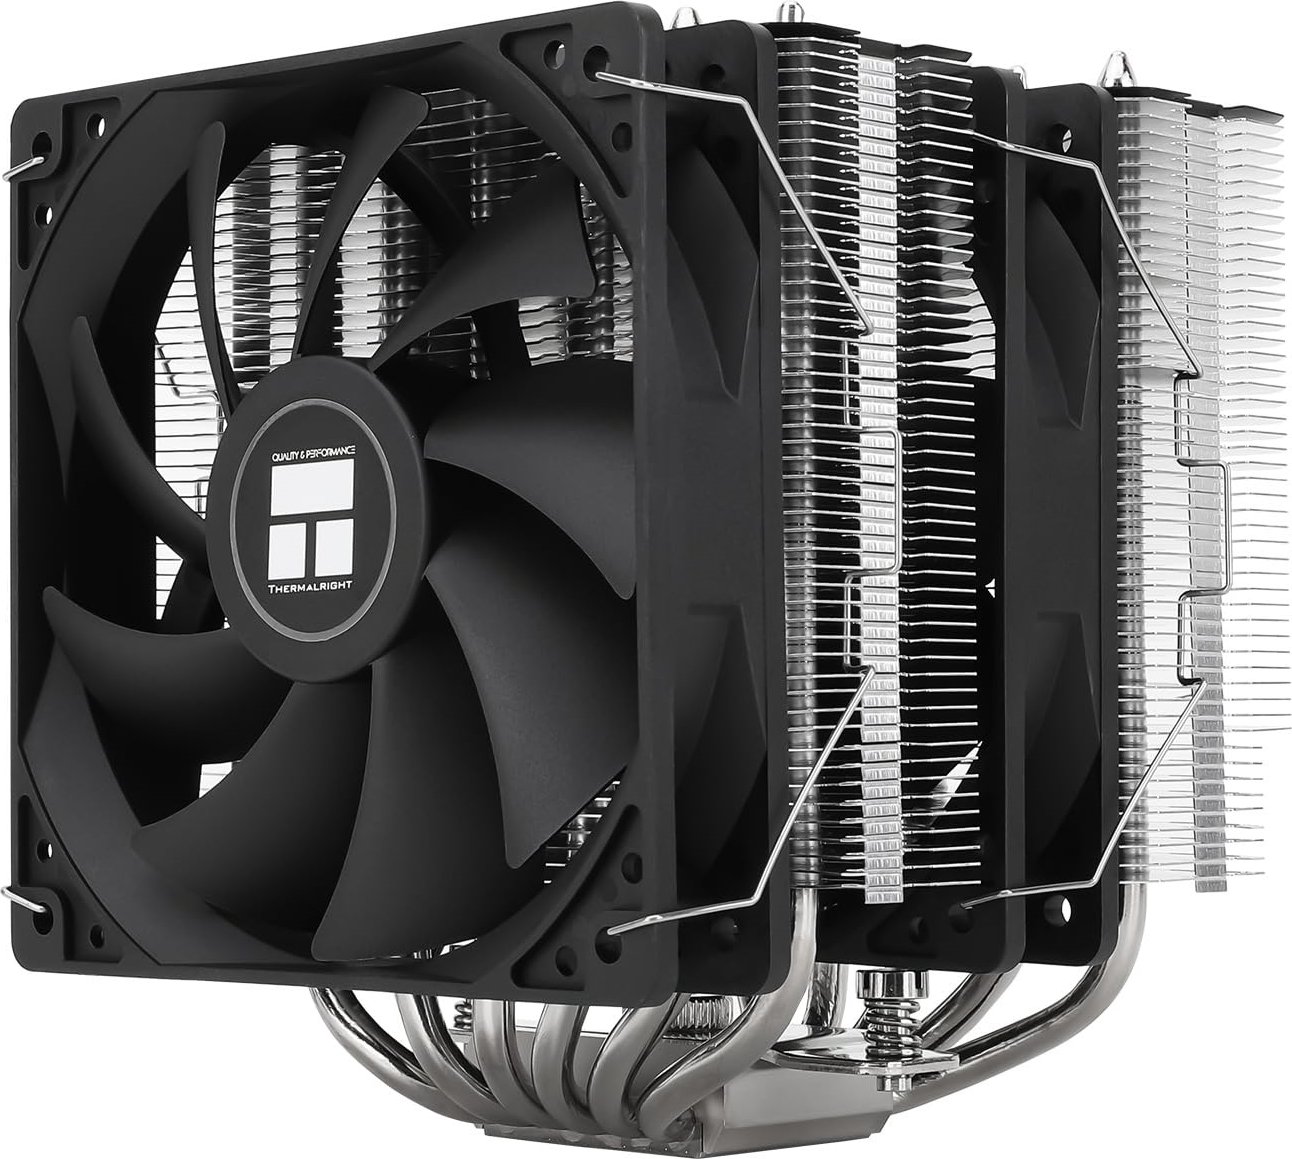 Thermalright Peerless Assassin 120 SE Review: Incredible